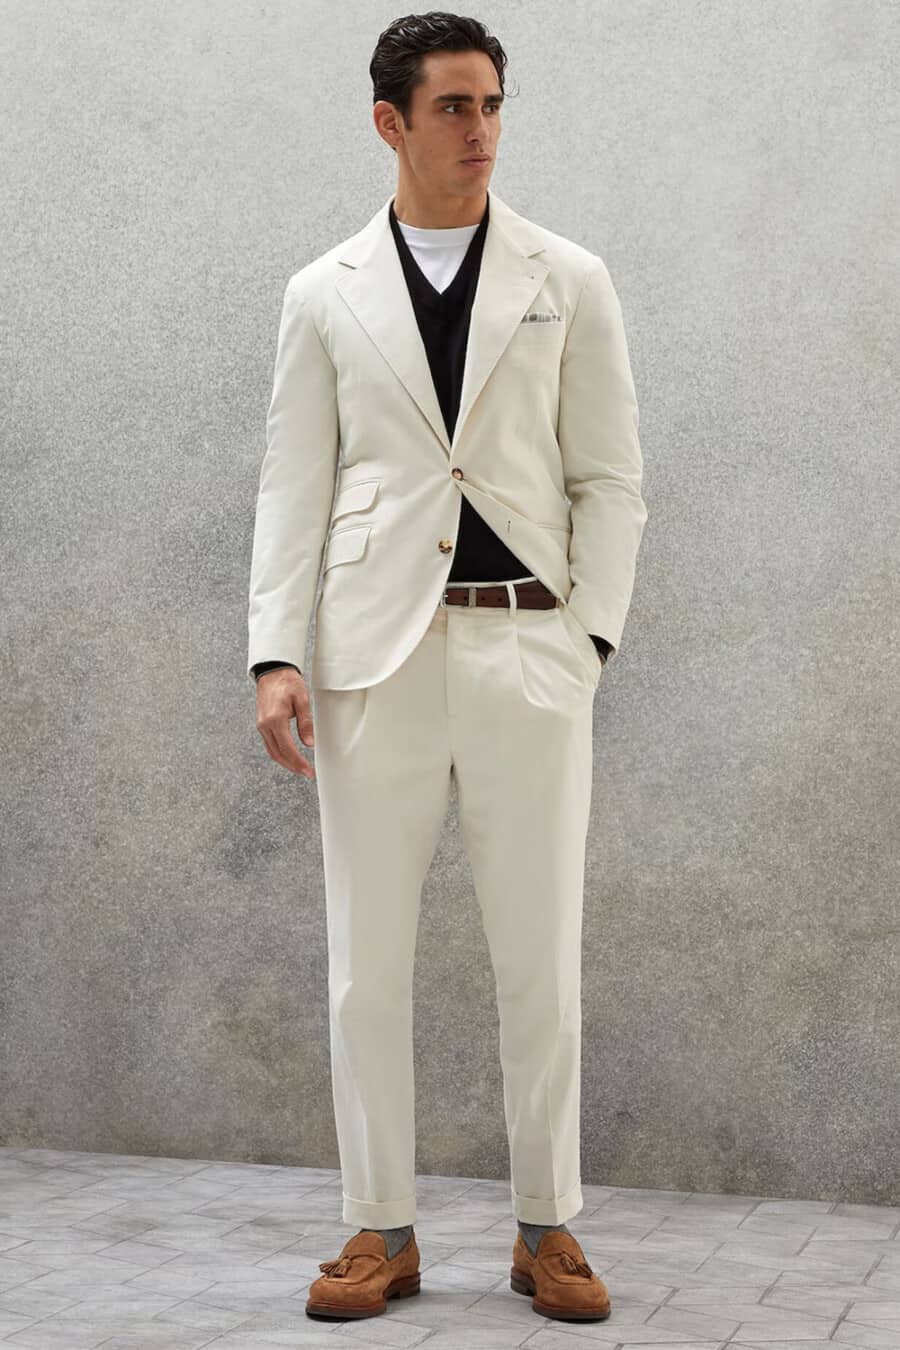 Men's cream suit, white T-shirt, black v-neck sweater and tan suede tassel loafers outfit